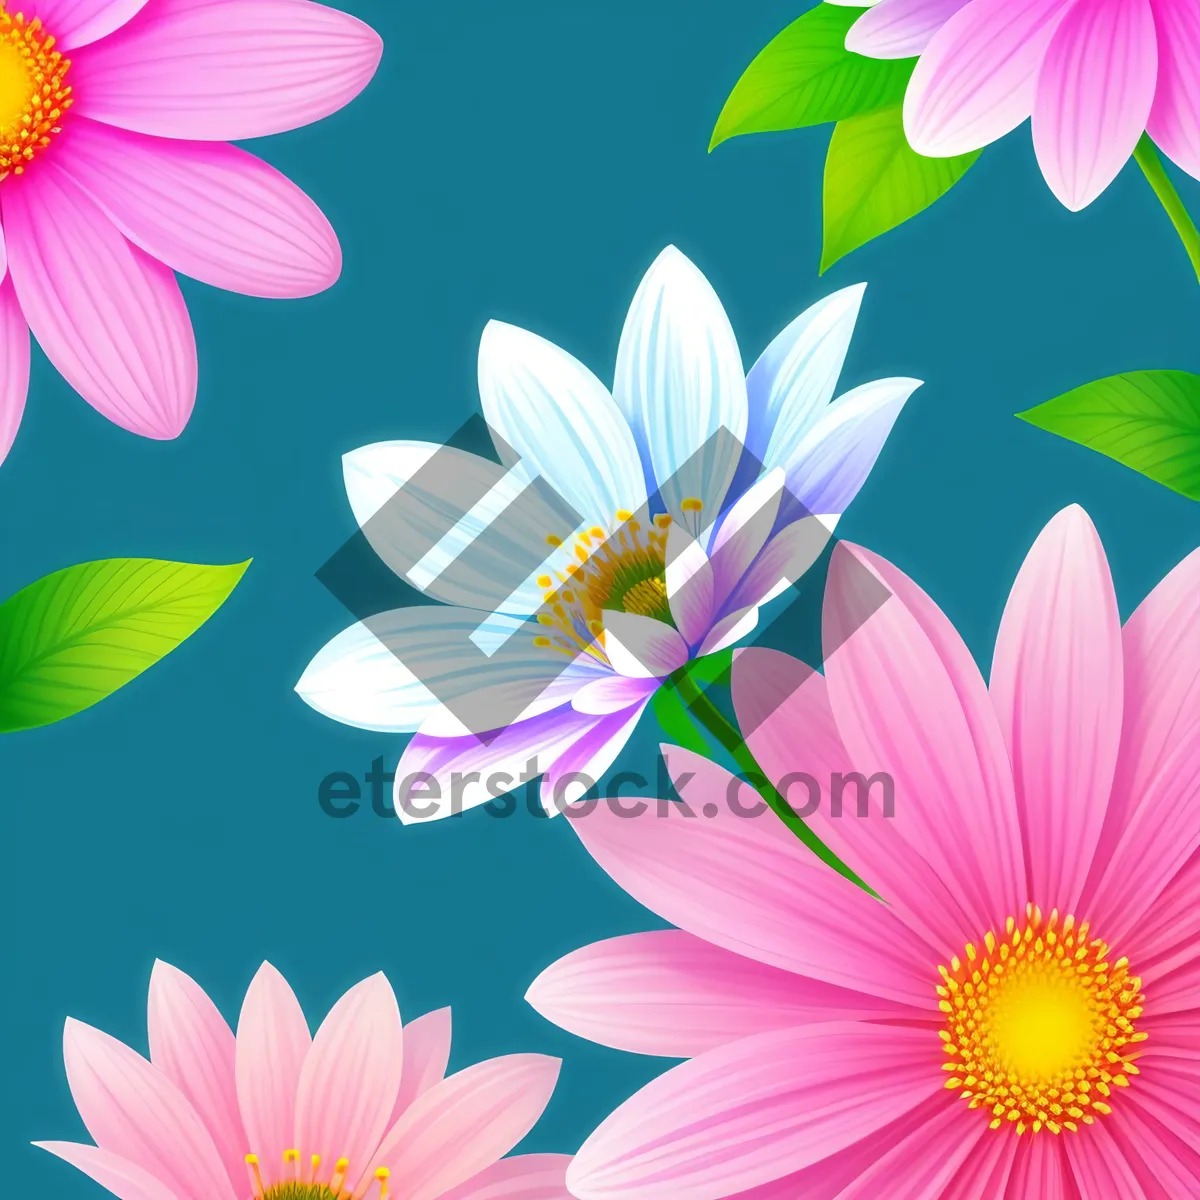 Picture of Vibrant Lotus Blossom in Pink and Yellow